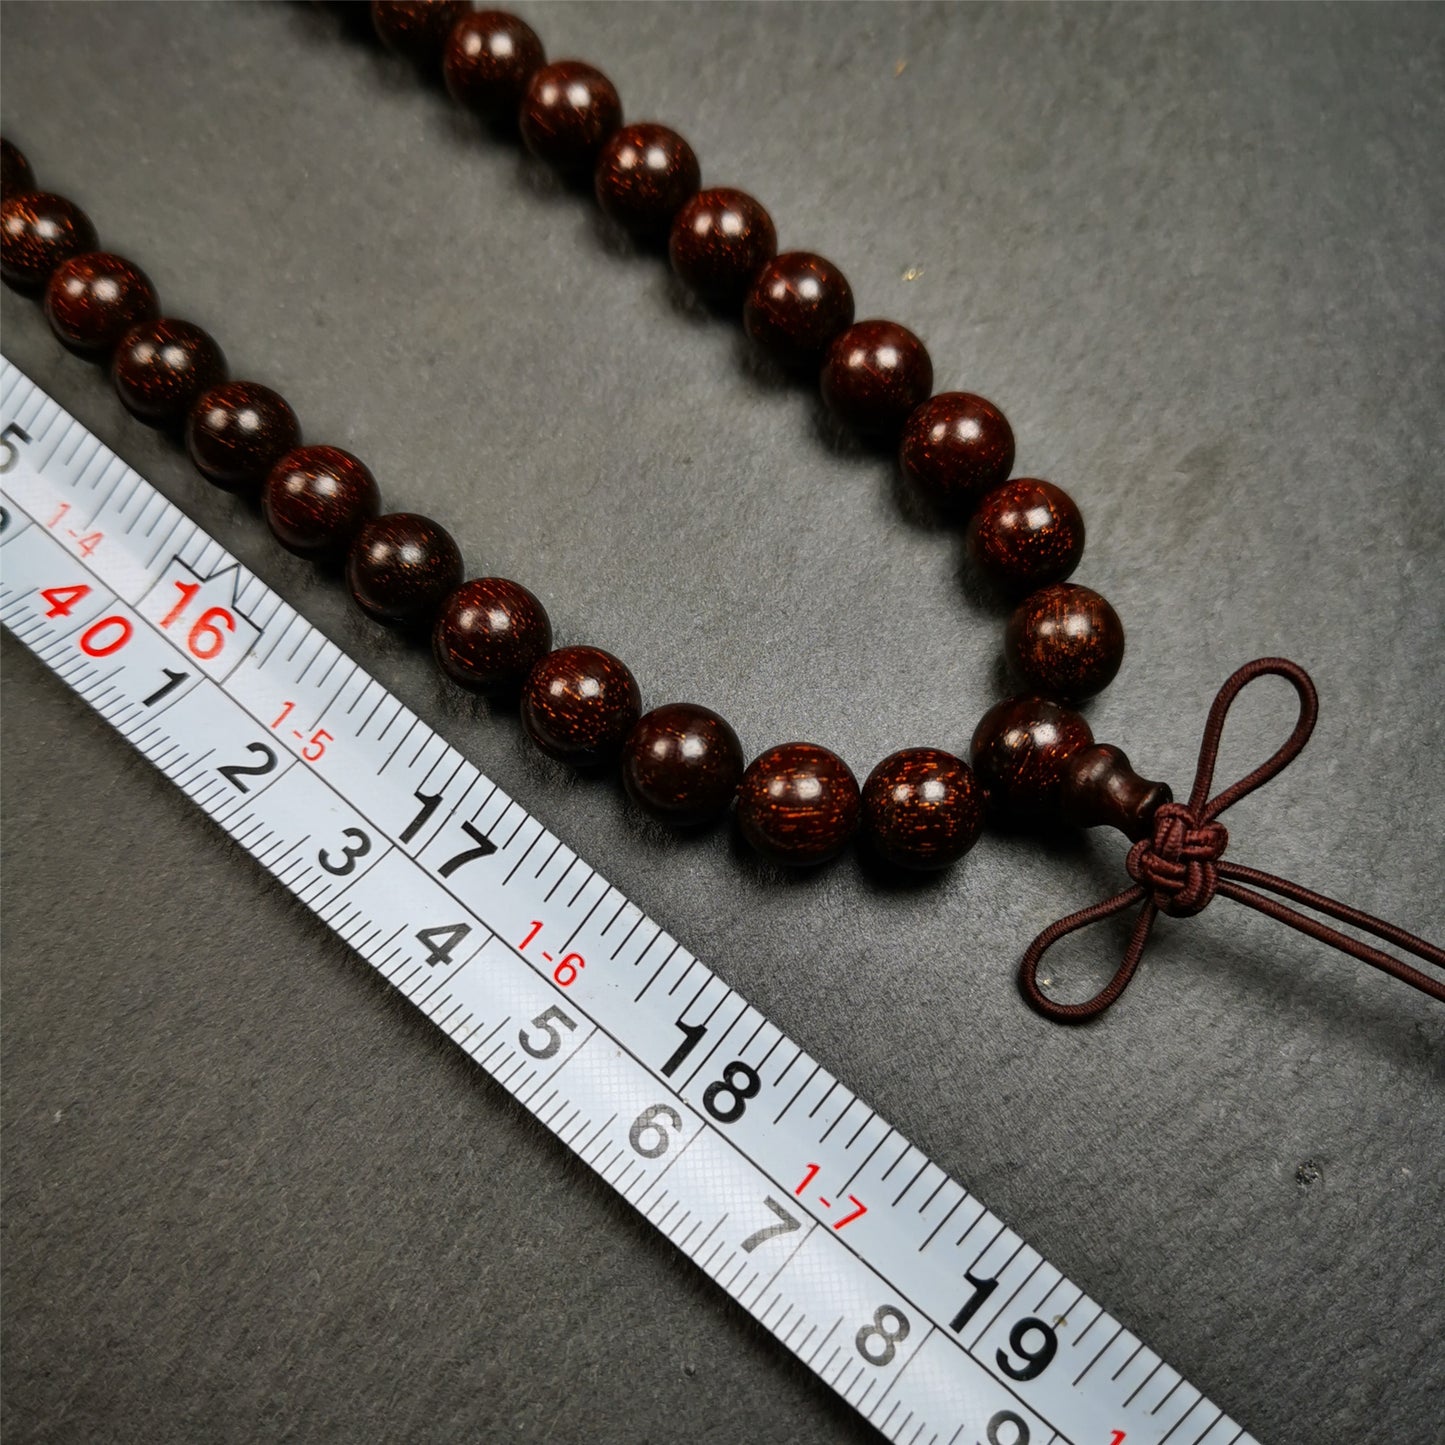 This mala was made by Tibetan craftsmen from Hepo Town, Baiyu County, the birthplace of the famous Tibetan handicrafts.  It is made of Dalbergia Wood(Huanghuali), brown color,108 round cut beads diameter of 9mm / 0.35",circumference is 92cm / 36".